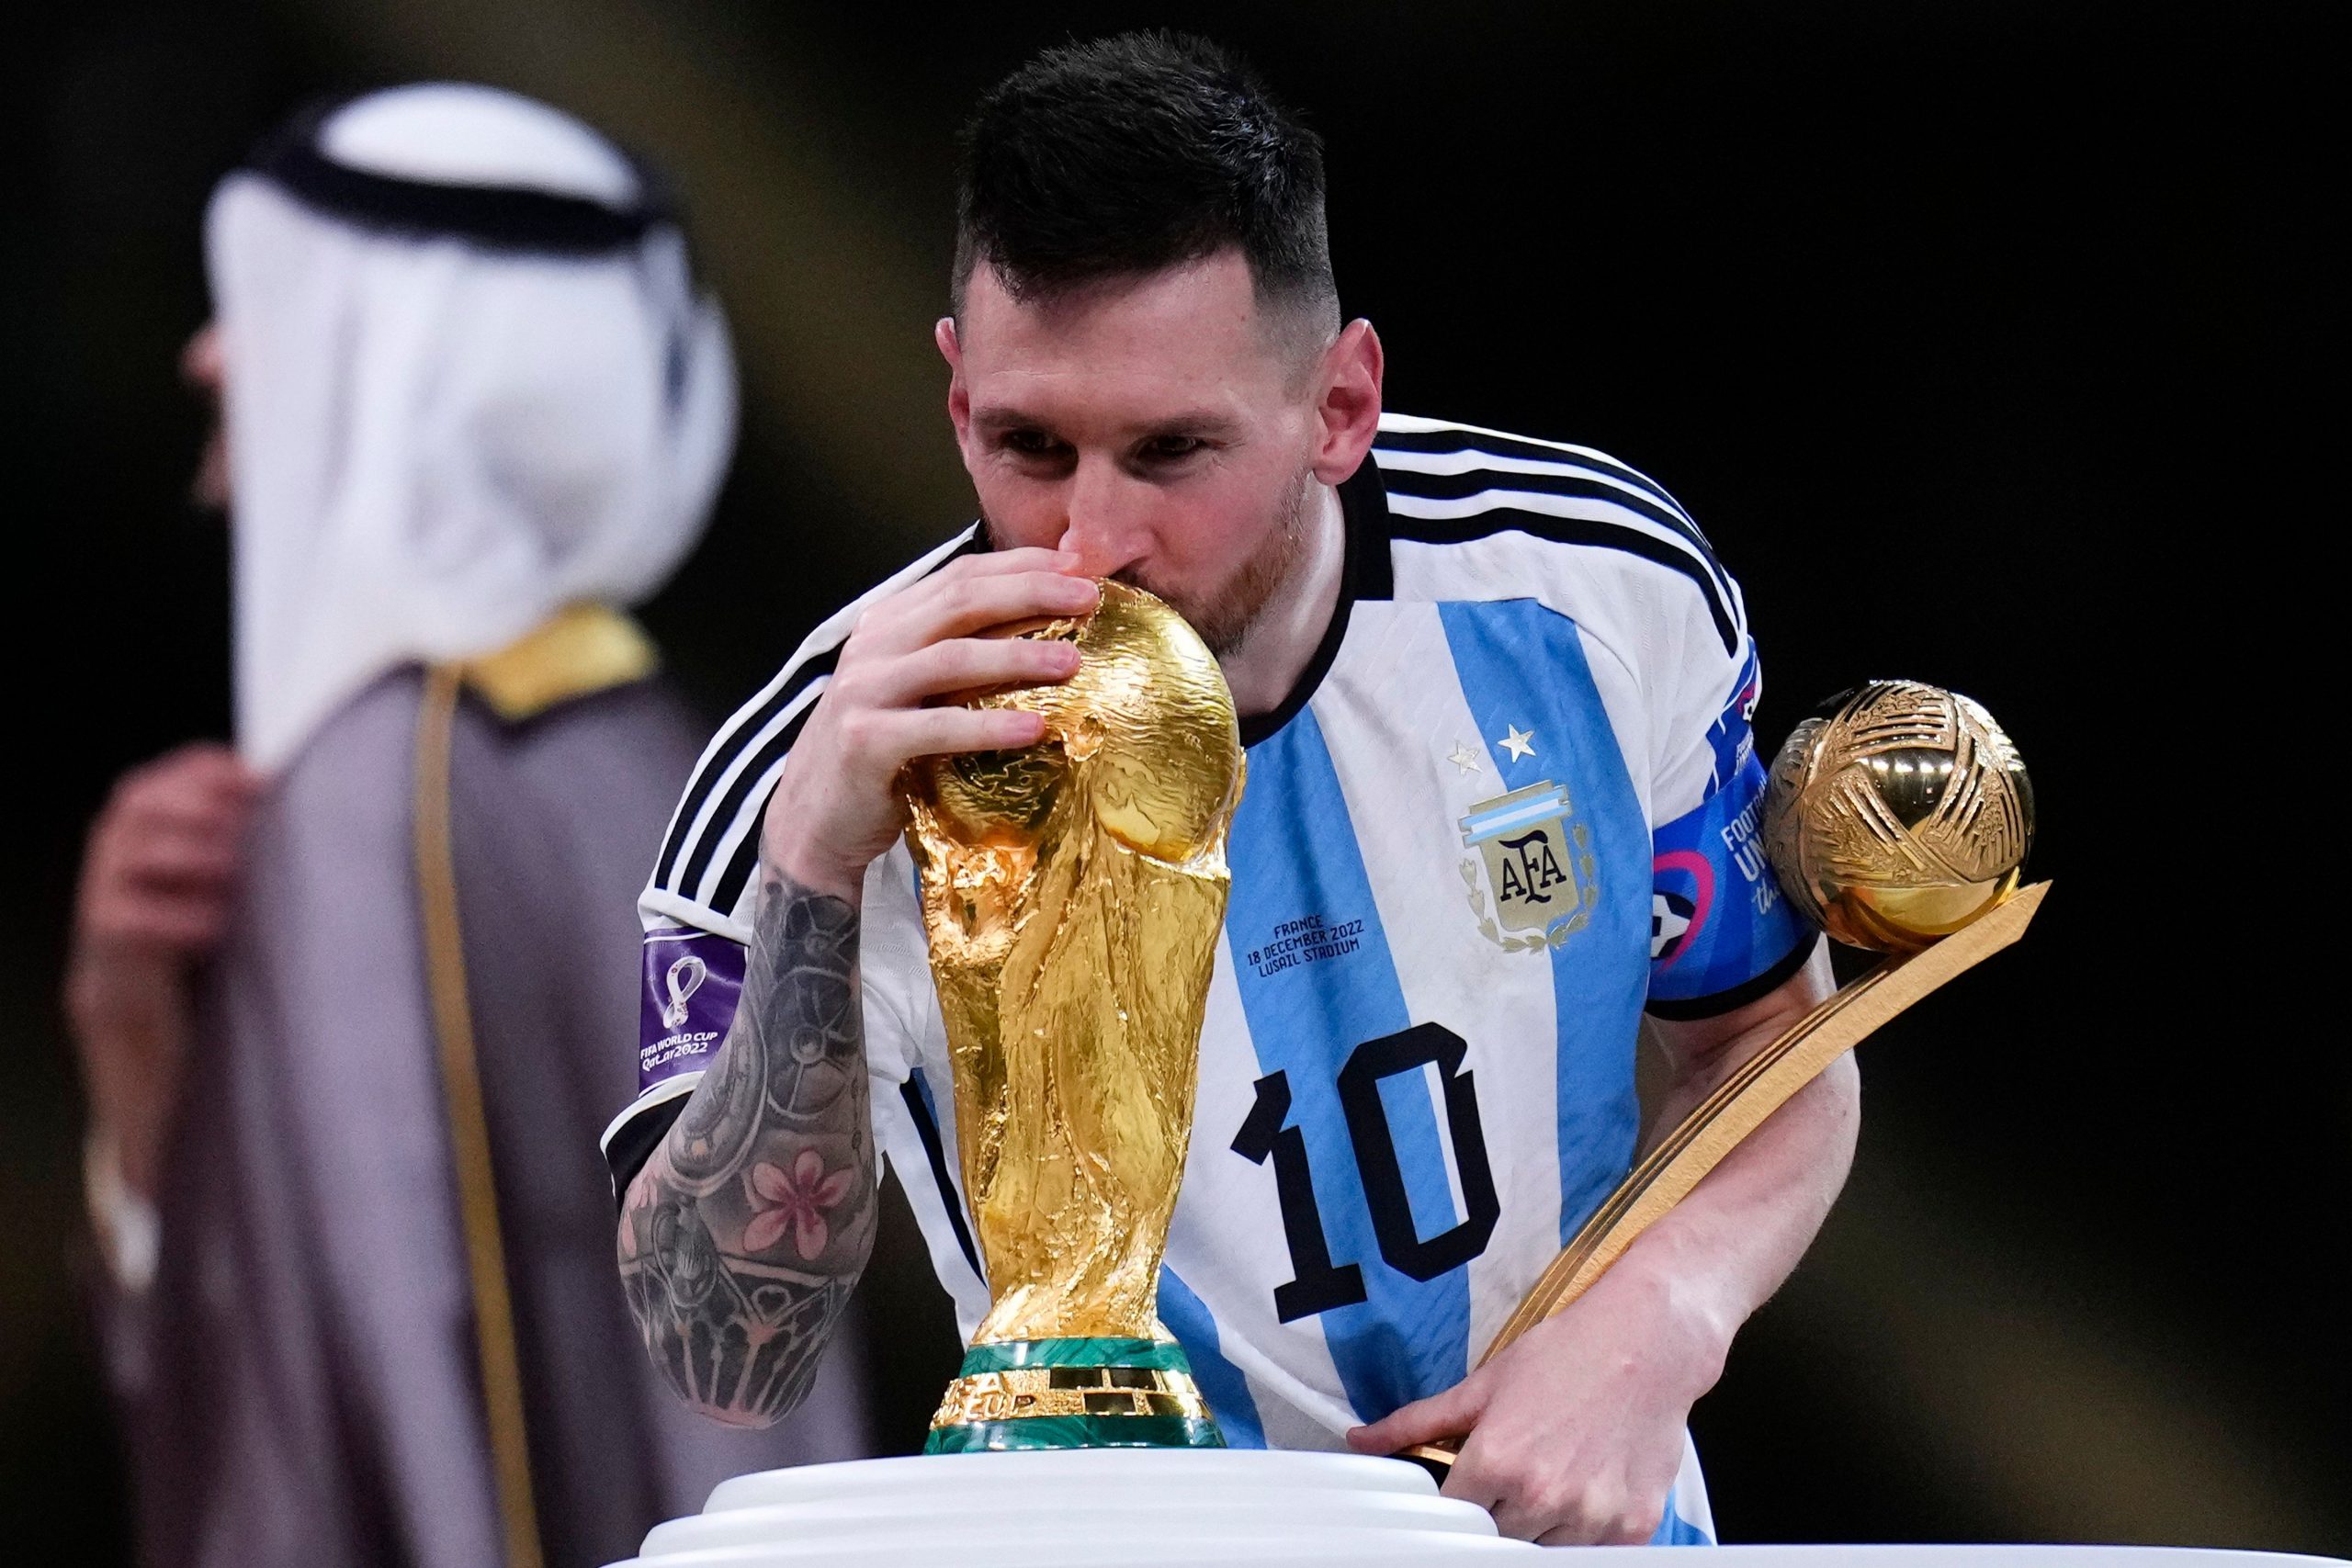 Lionel Messi’s Argentina charged by FIFA over World Cup celebrations